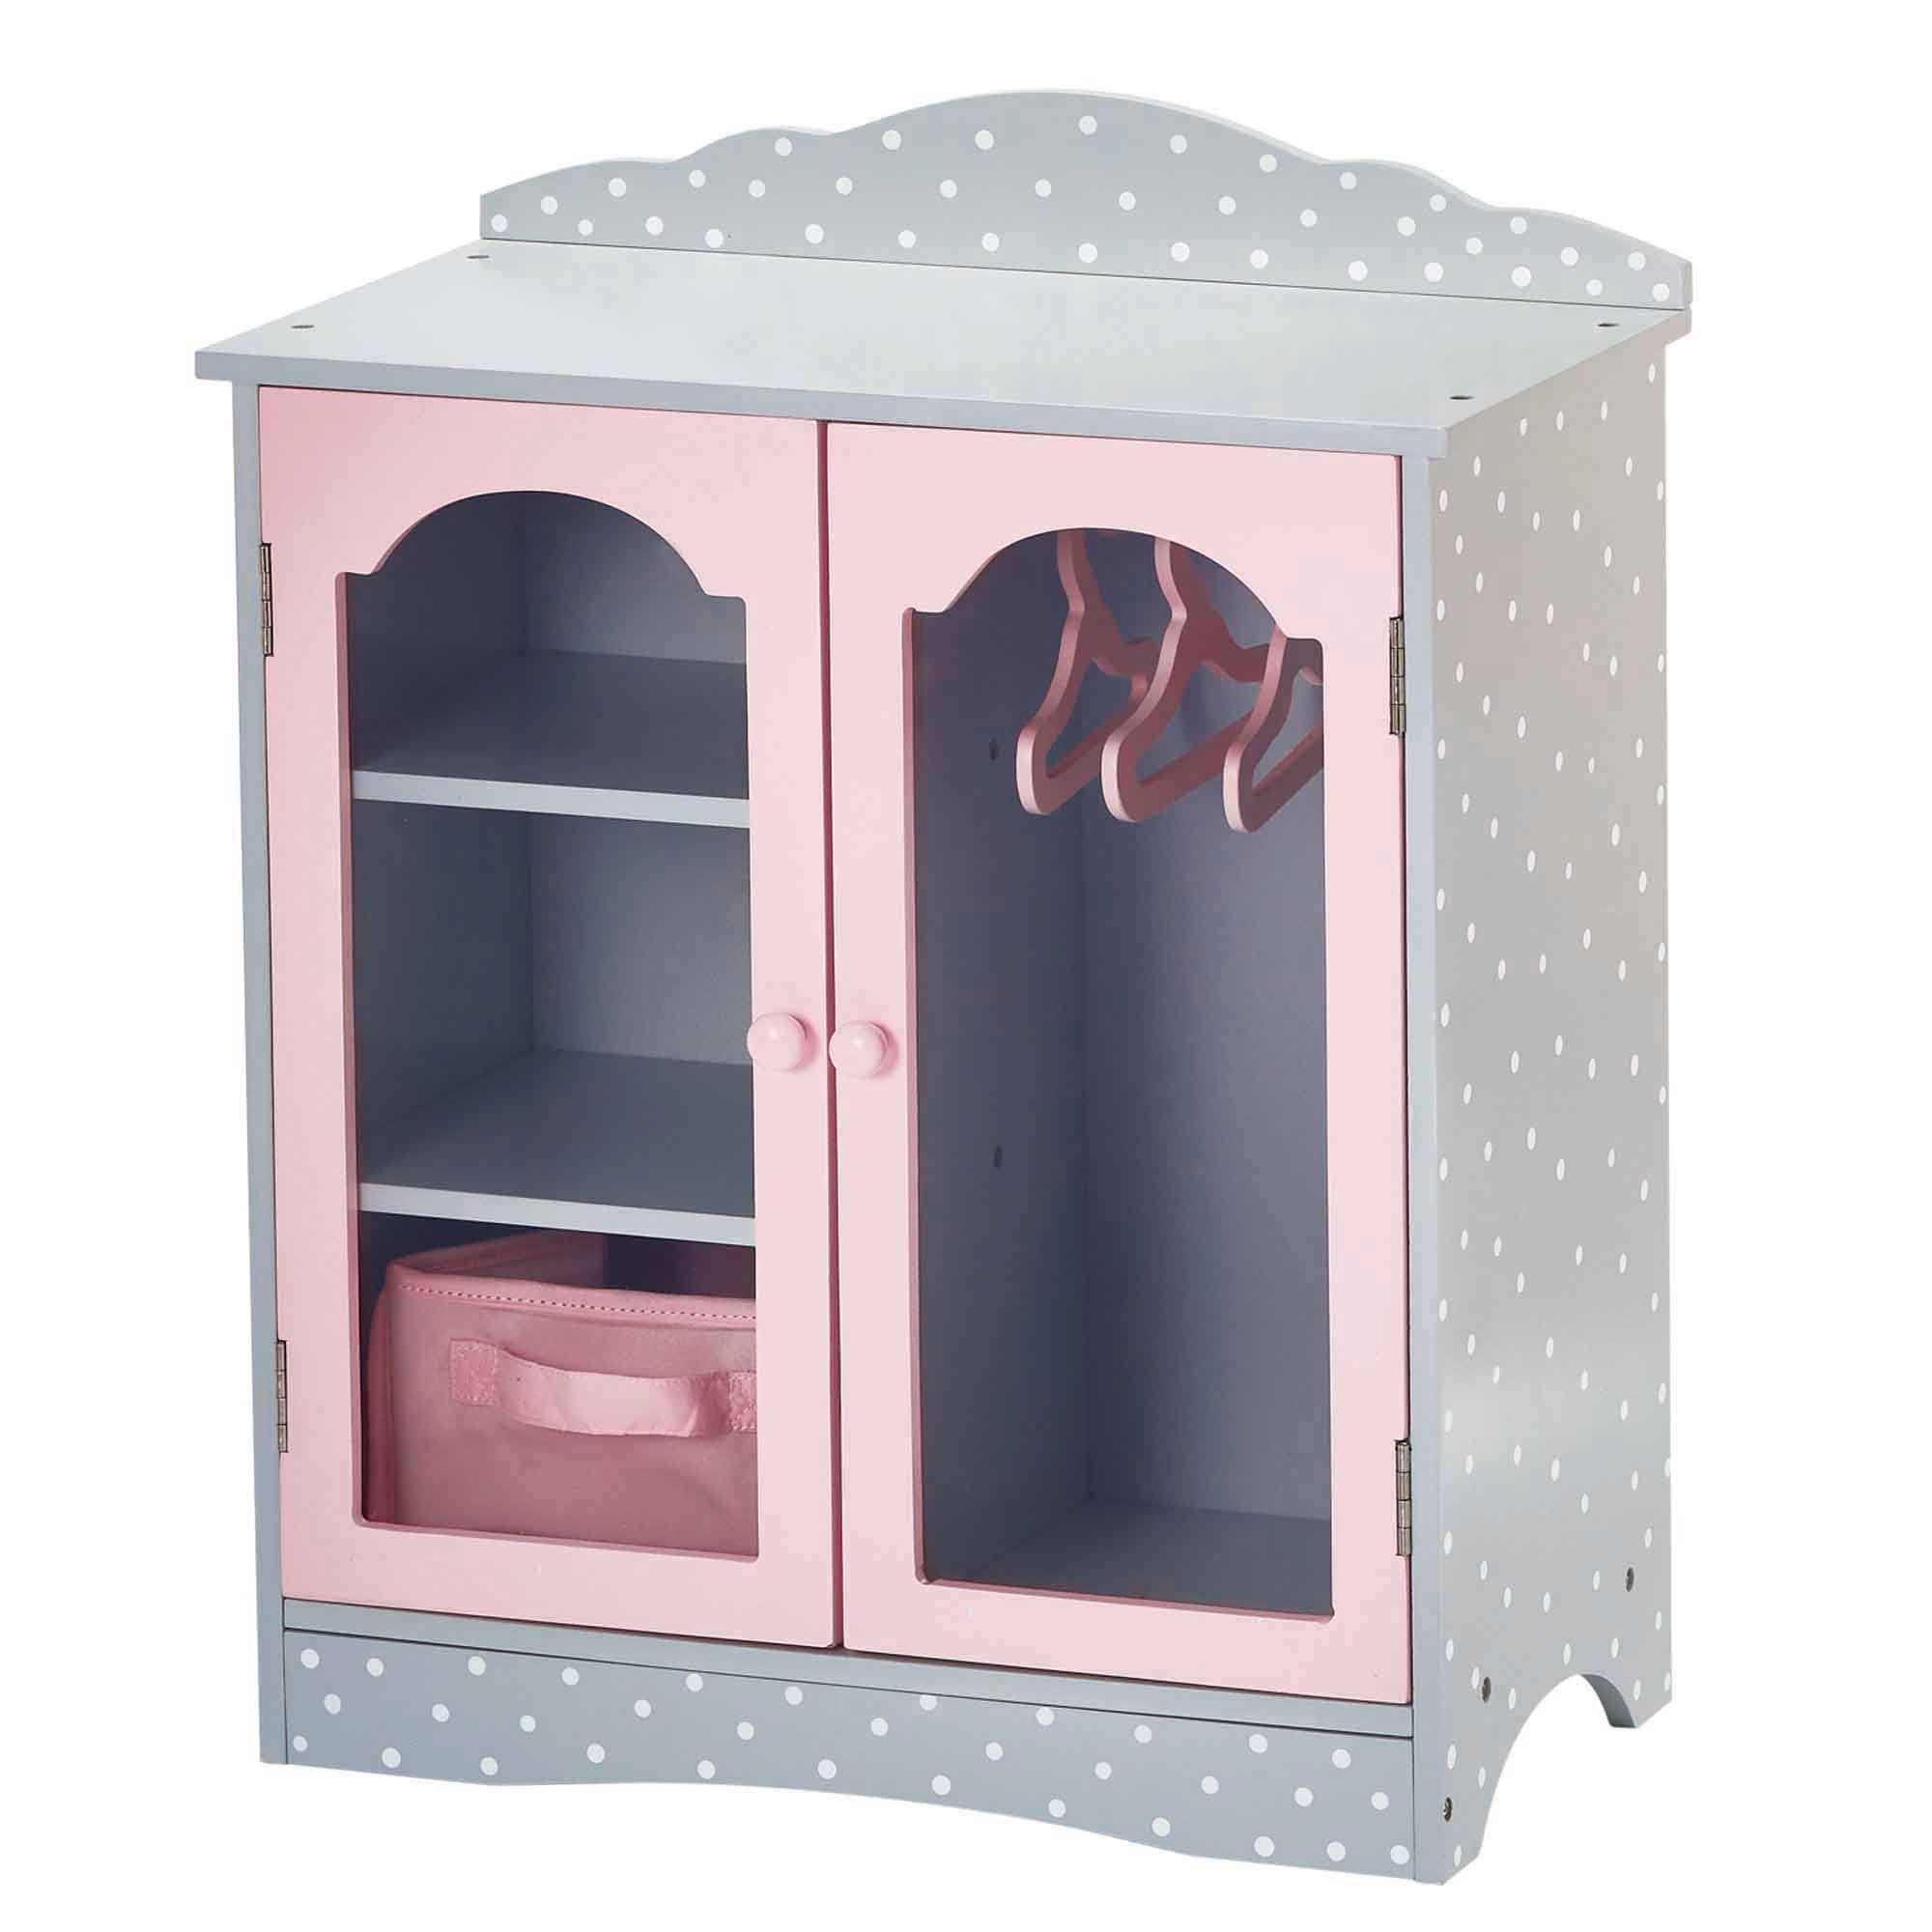 Olivia's Little World - Polka Dots Princess 18 inch Doll Wooden Closet with 3 Hangers, Fits American Girls, Our Generation Dolls, Doll Furniture, Accessories and Clothes Storage - Pink & Gray